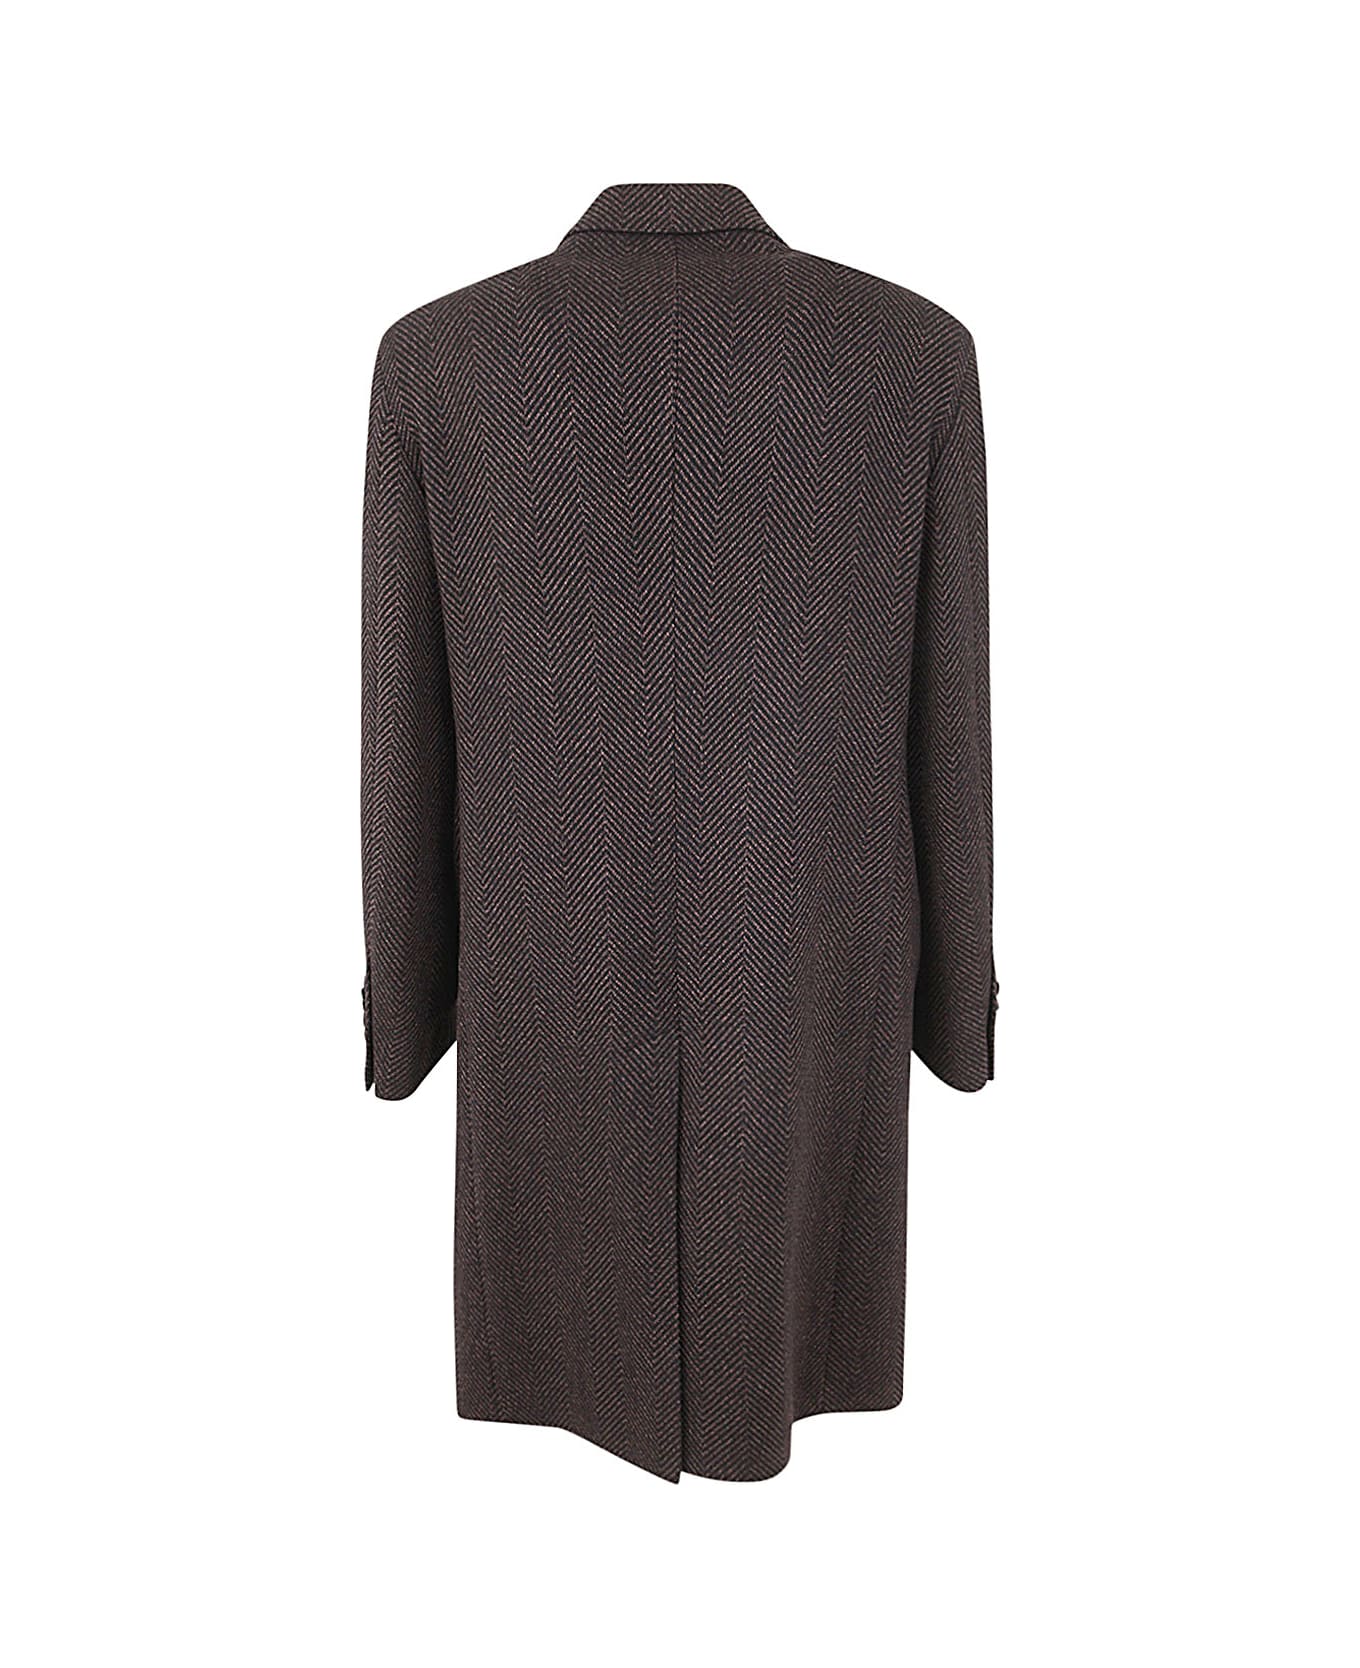 Tagliatore Oversized Double Breasted Coat - Black Brown コート